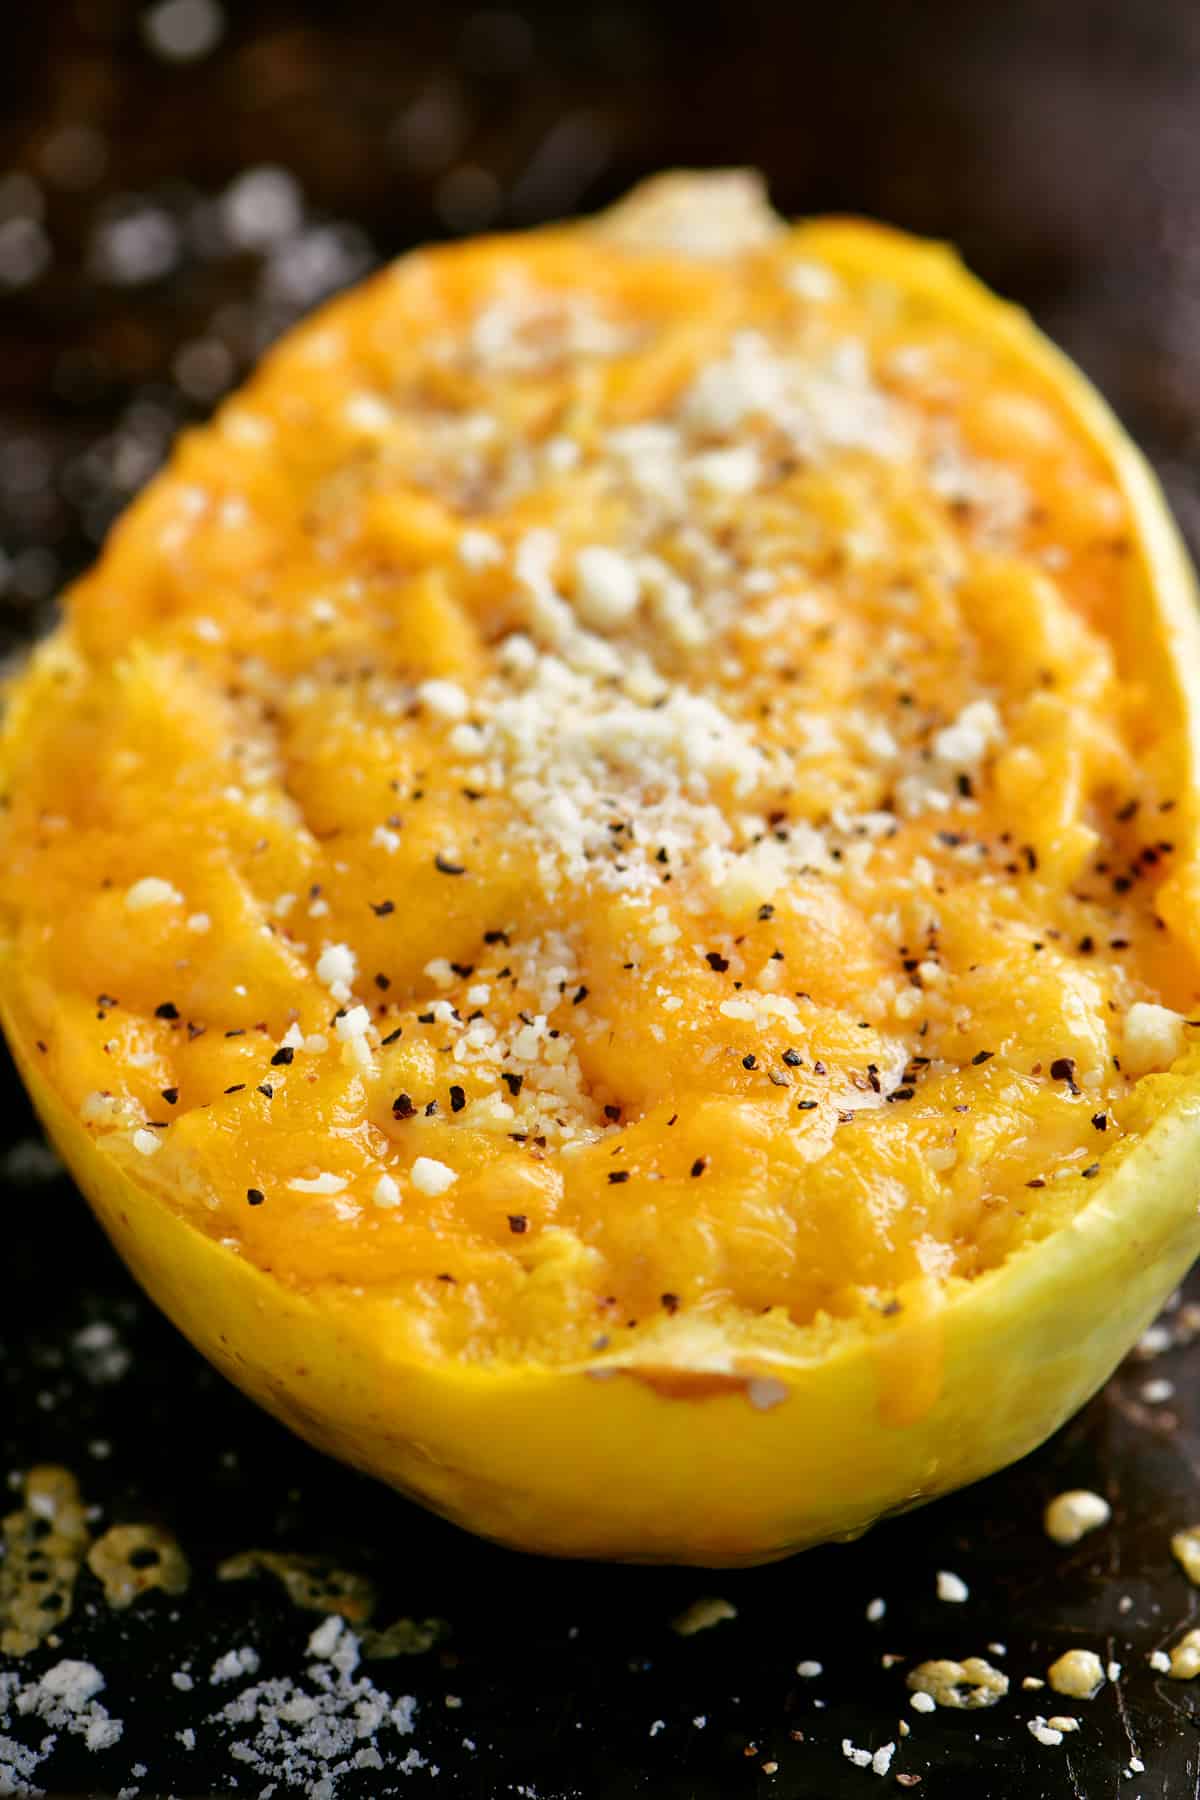 a close-up photo of the baked macaroni and cheese spaghetti squash